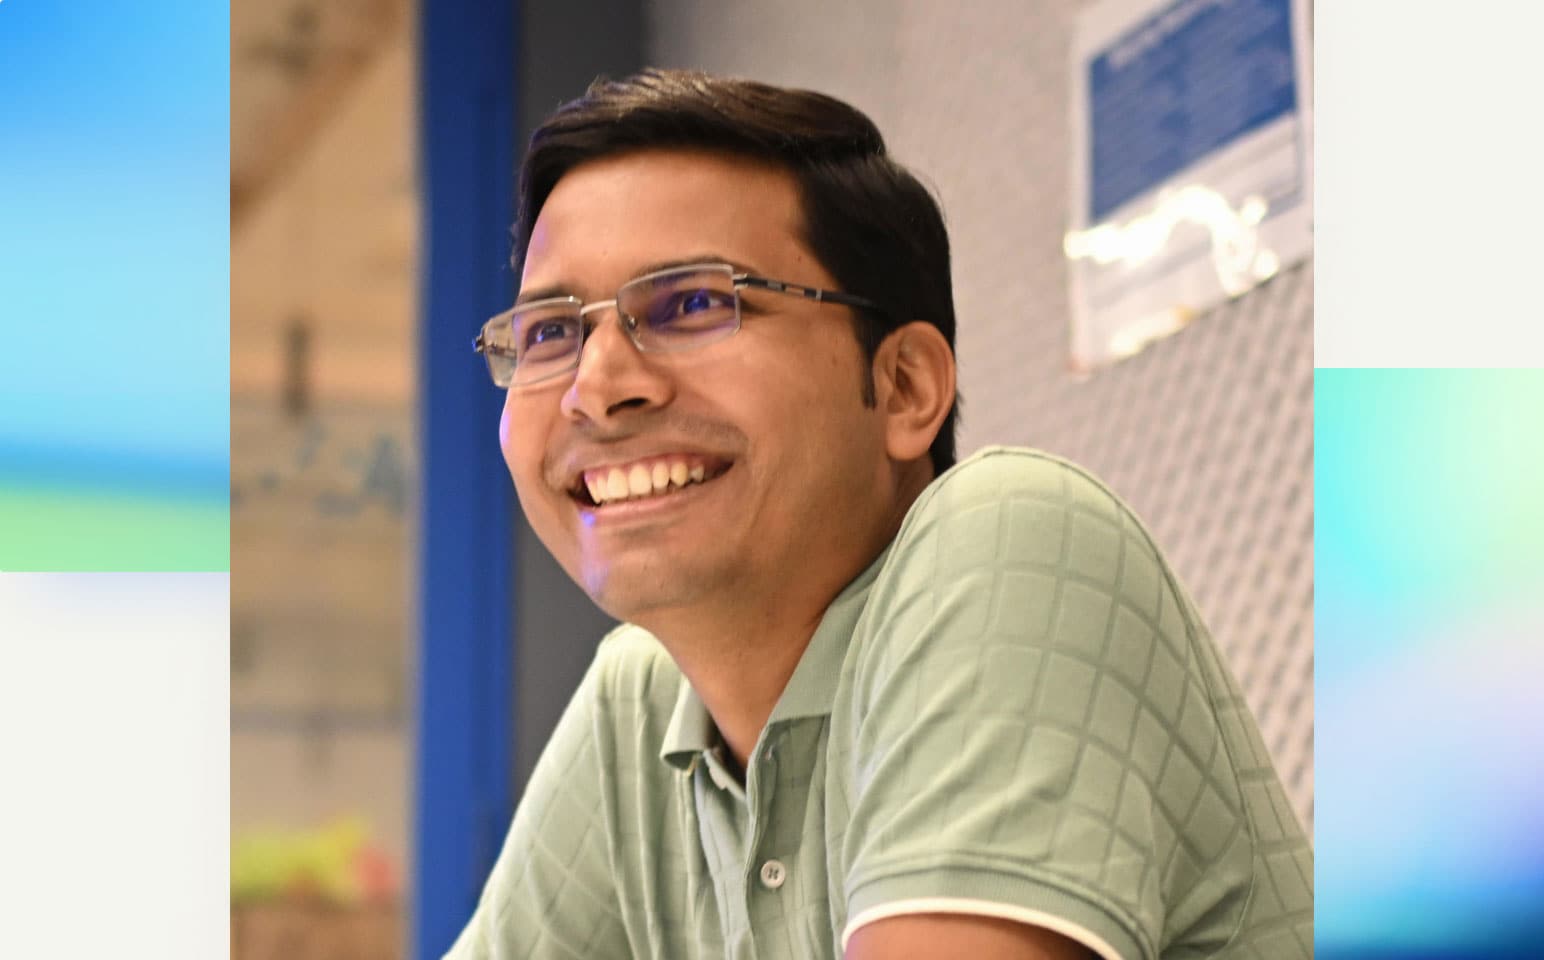 A smiling person wearing glasses and a shirt and tie.